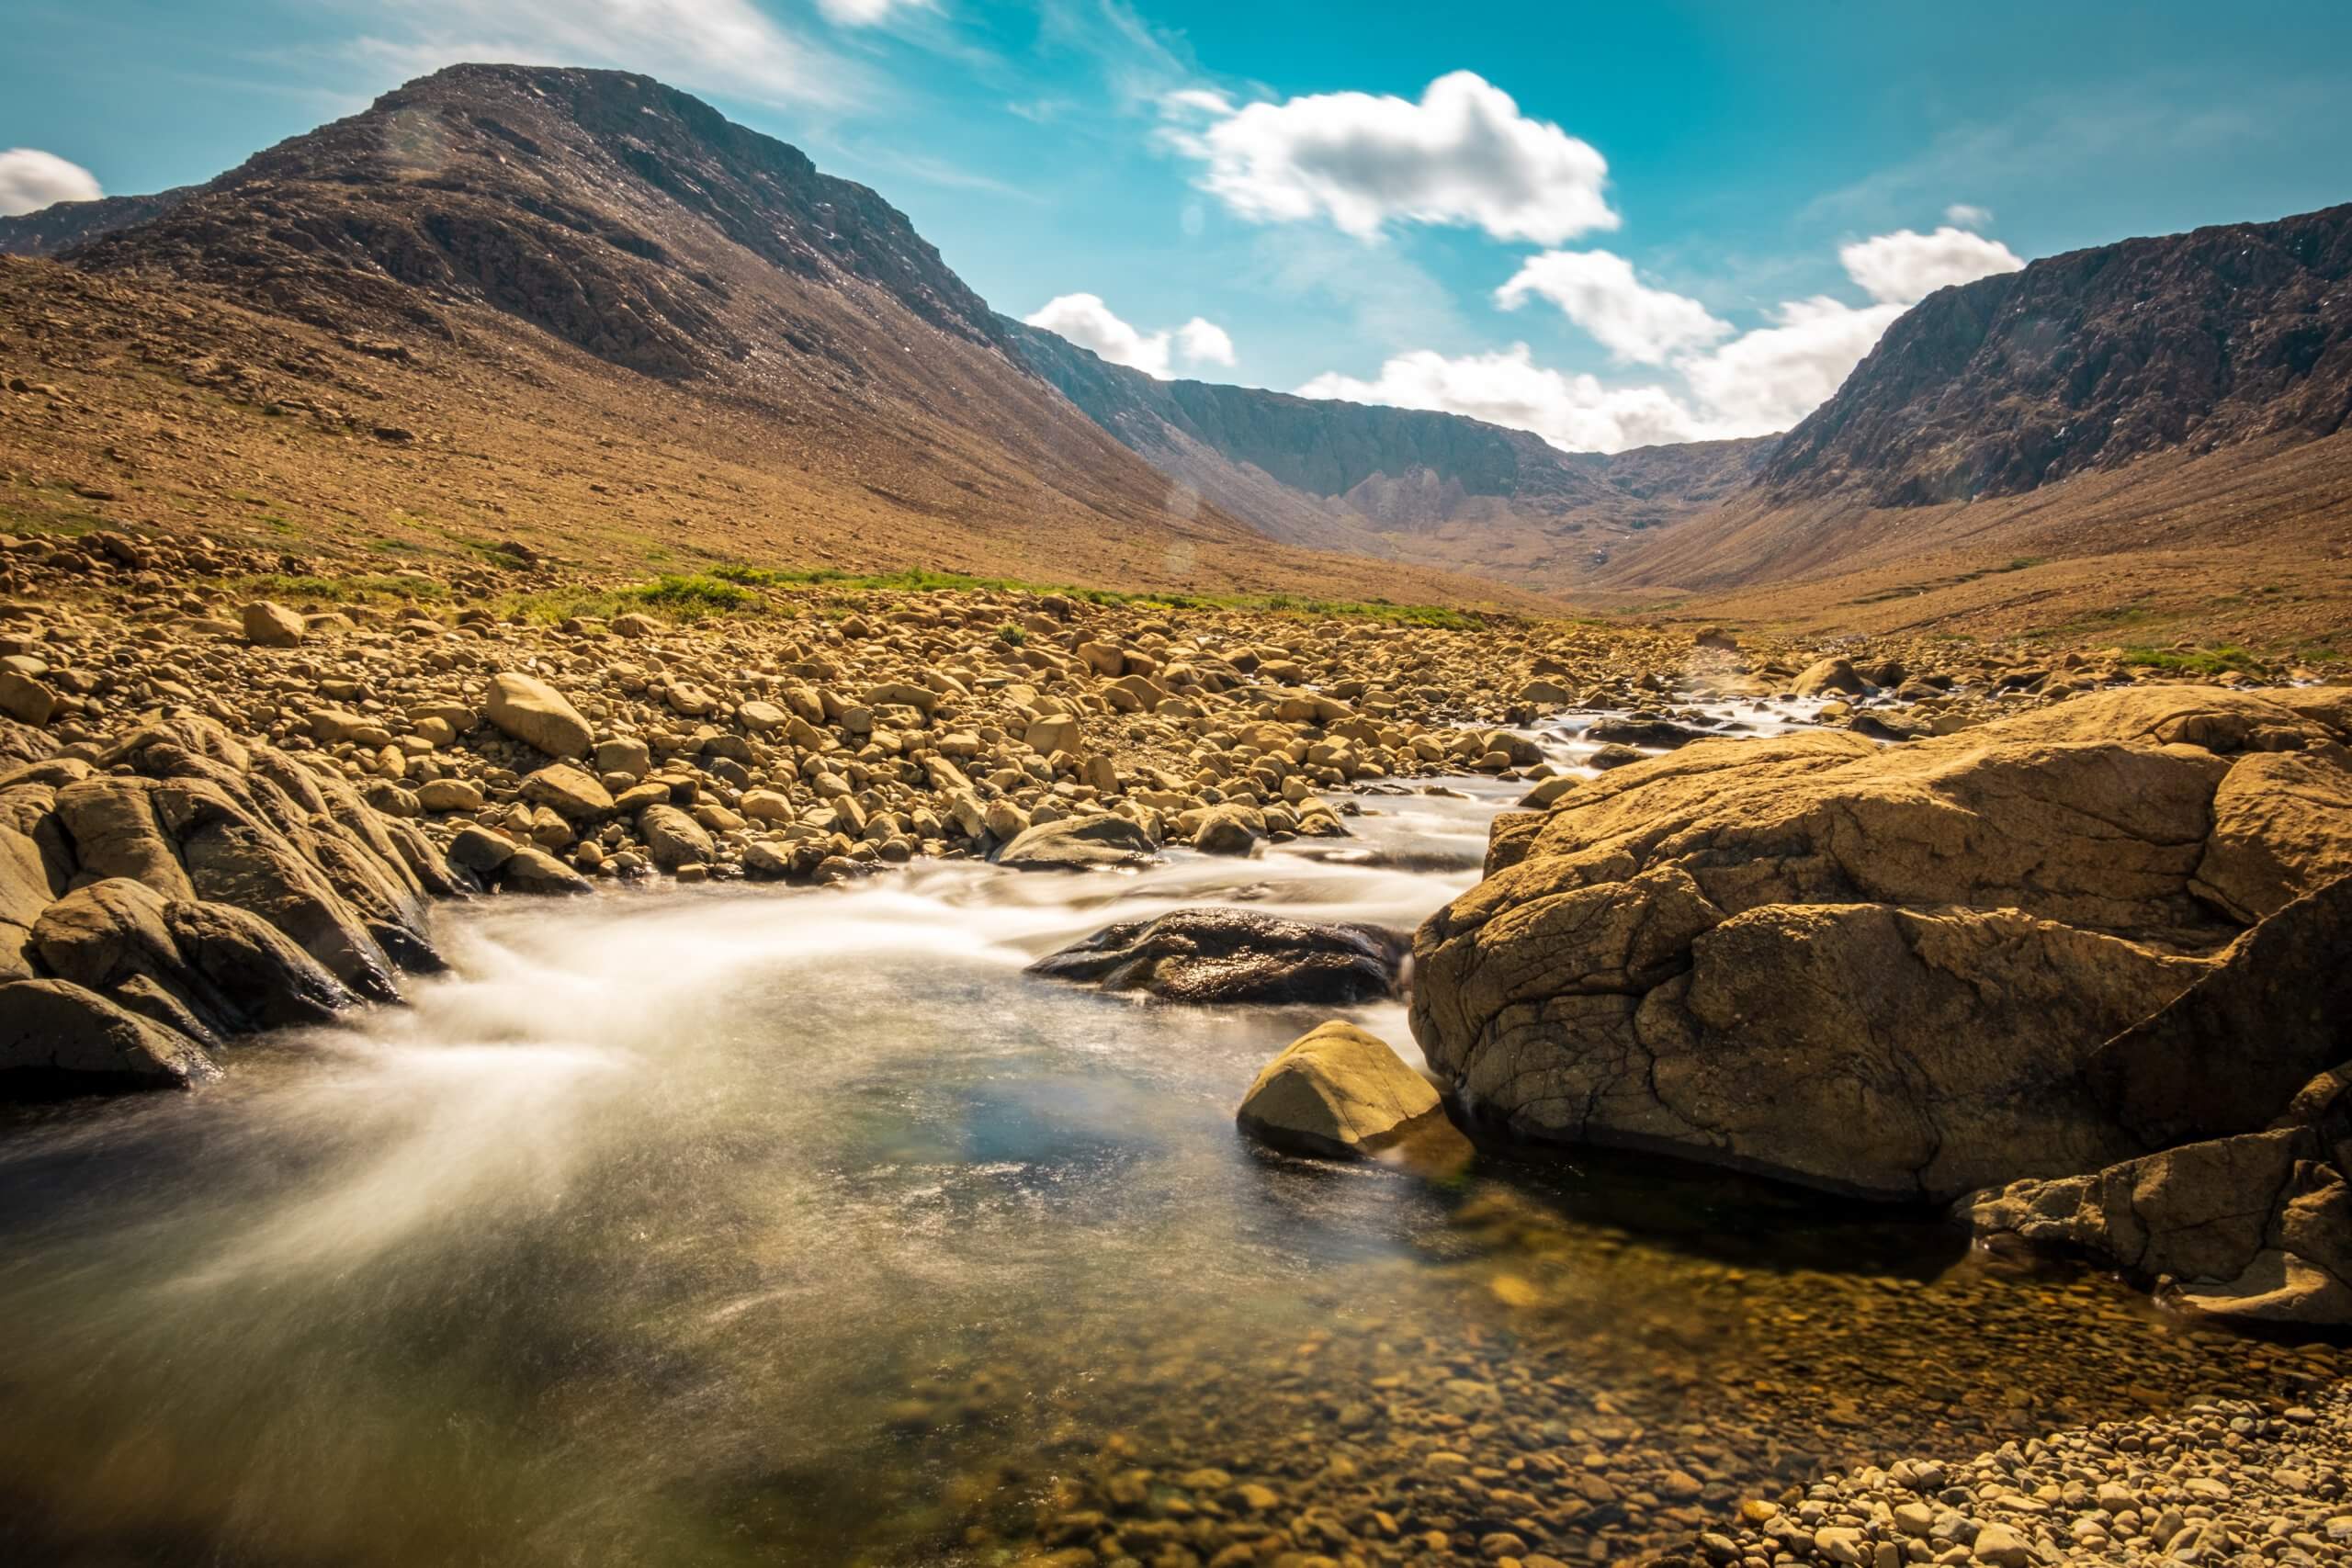 A long exposure photo of a stream running through the Tablelands in Gros Morne National Park